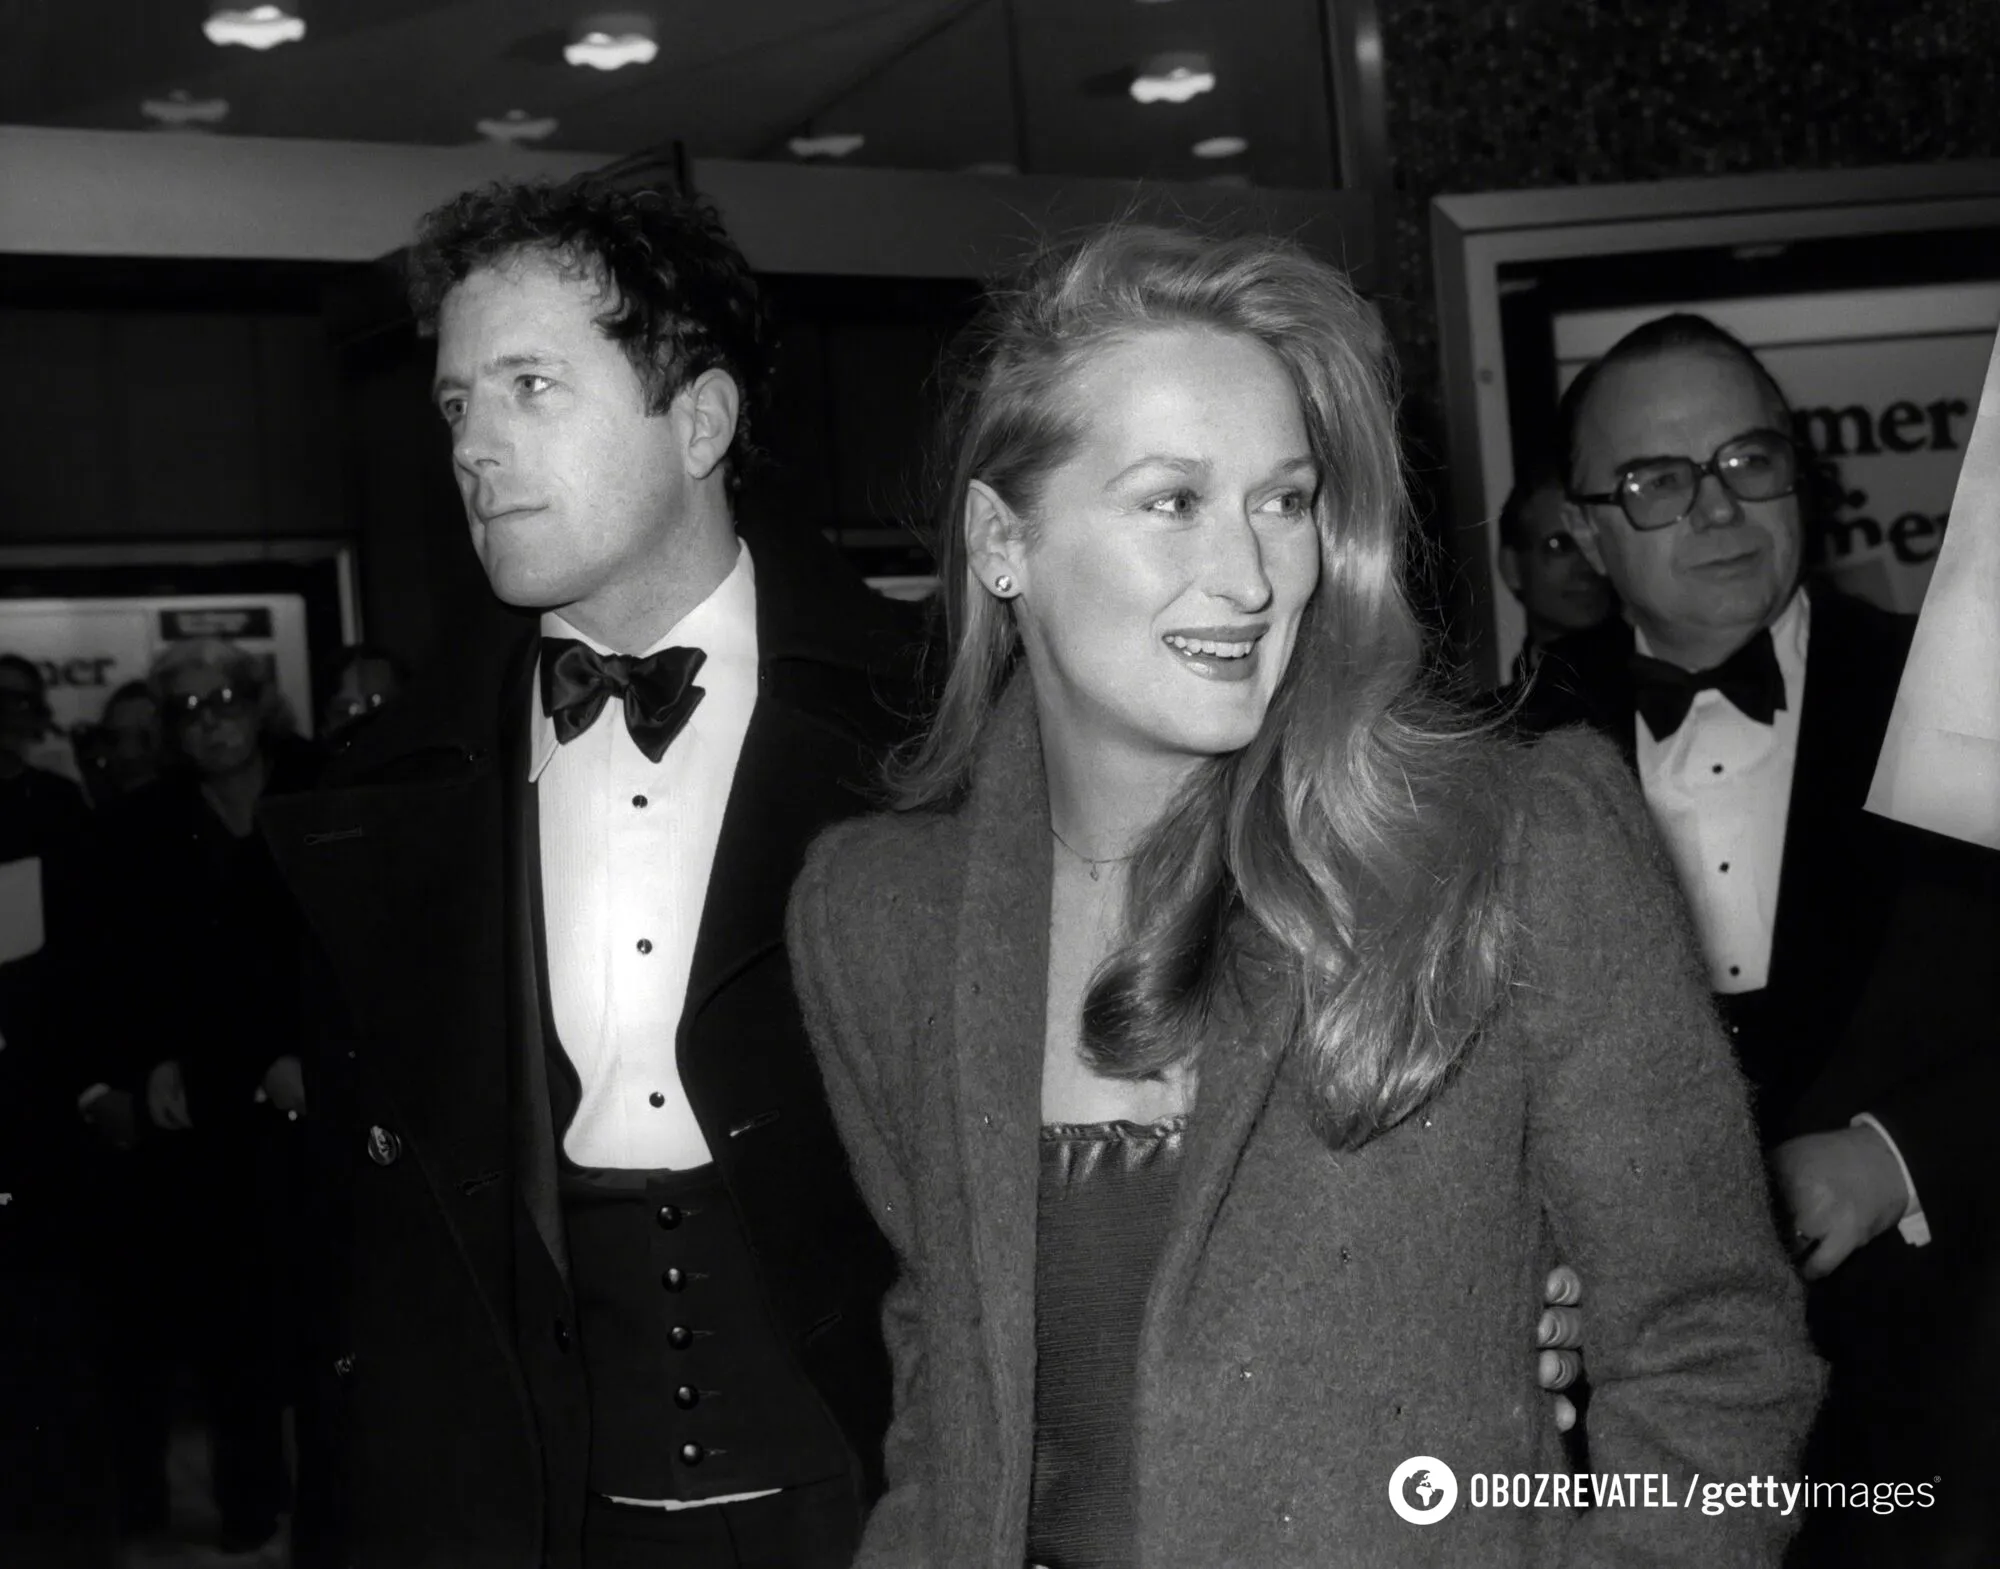 Iconic Meryl Streep shocked with news of divorce from her husband after 45 years of marriage